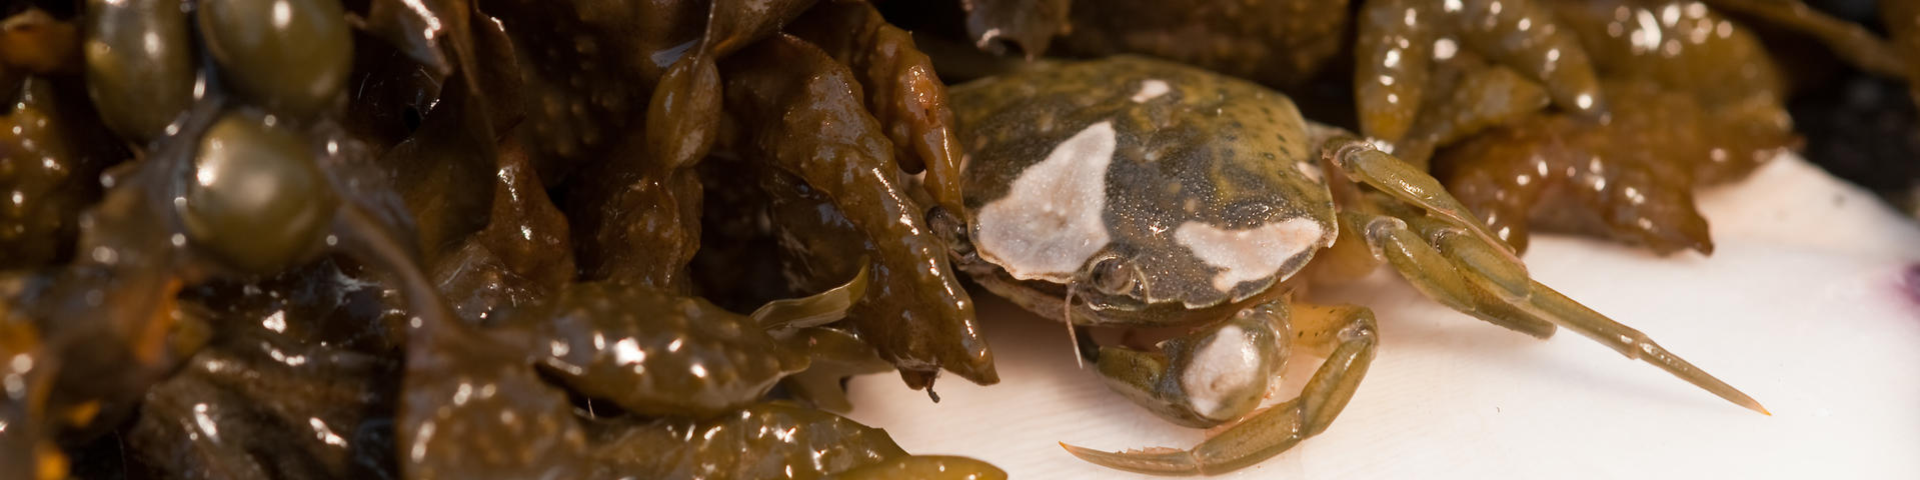 A crab stands still next to a bunch of fucus algae (brown algae).